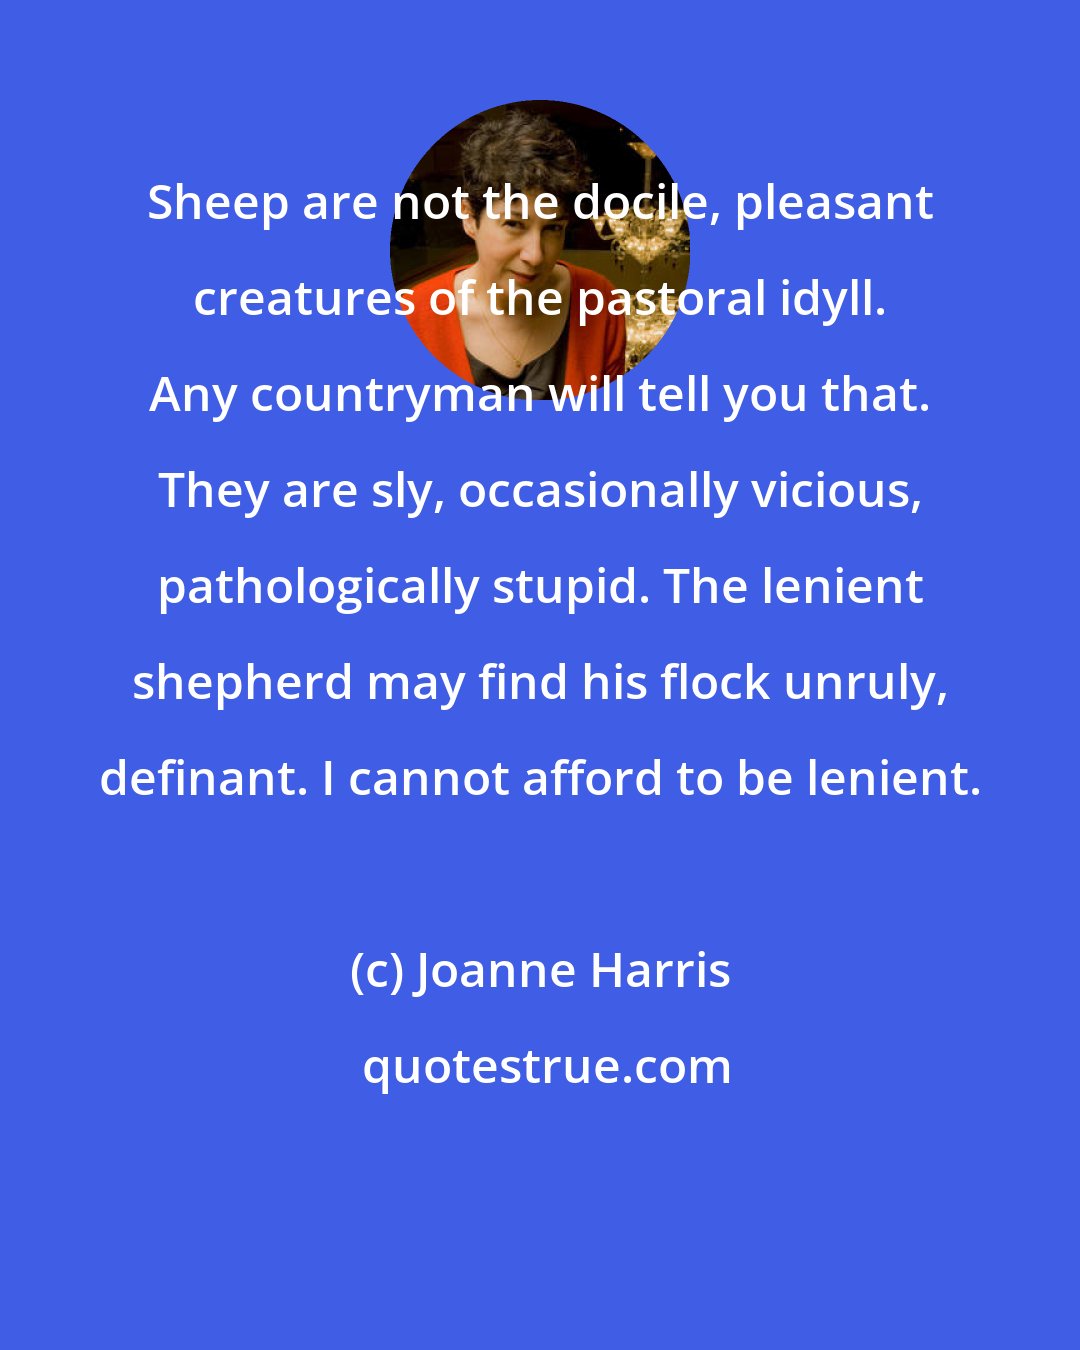 Joanne Harris: Sheep are not the docile, pleasant creatures of the pastoral idyll. Any countryman will tell you that. They are sly, occasionally vicious, pathologically stupid. The lenient shepherd may find his flock unruly, definant. I cannot afford to be lenient.